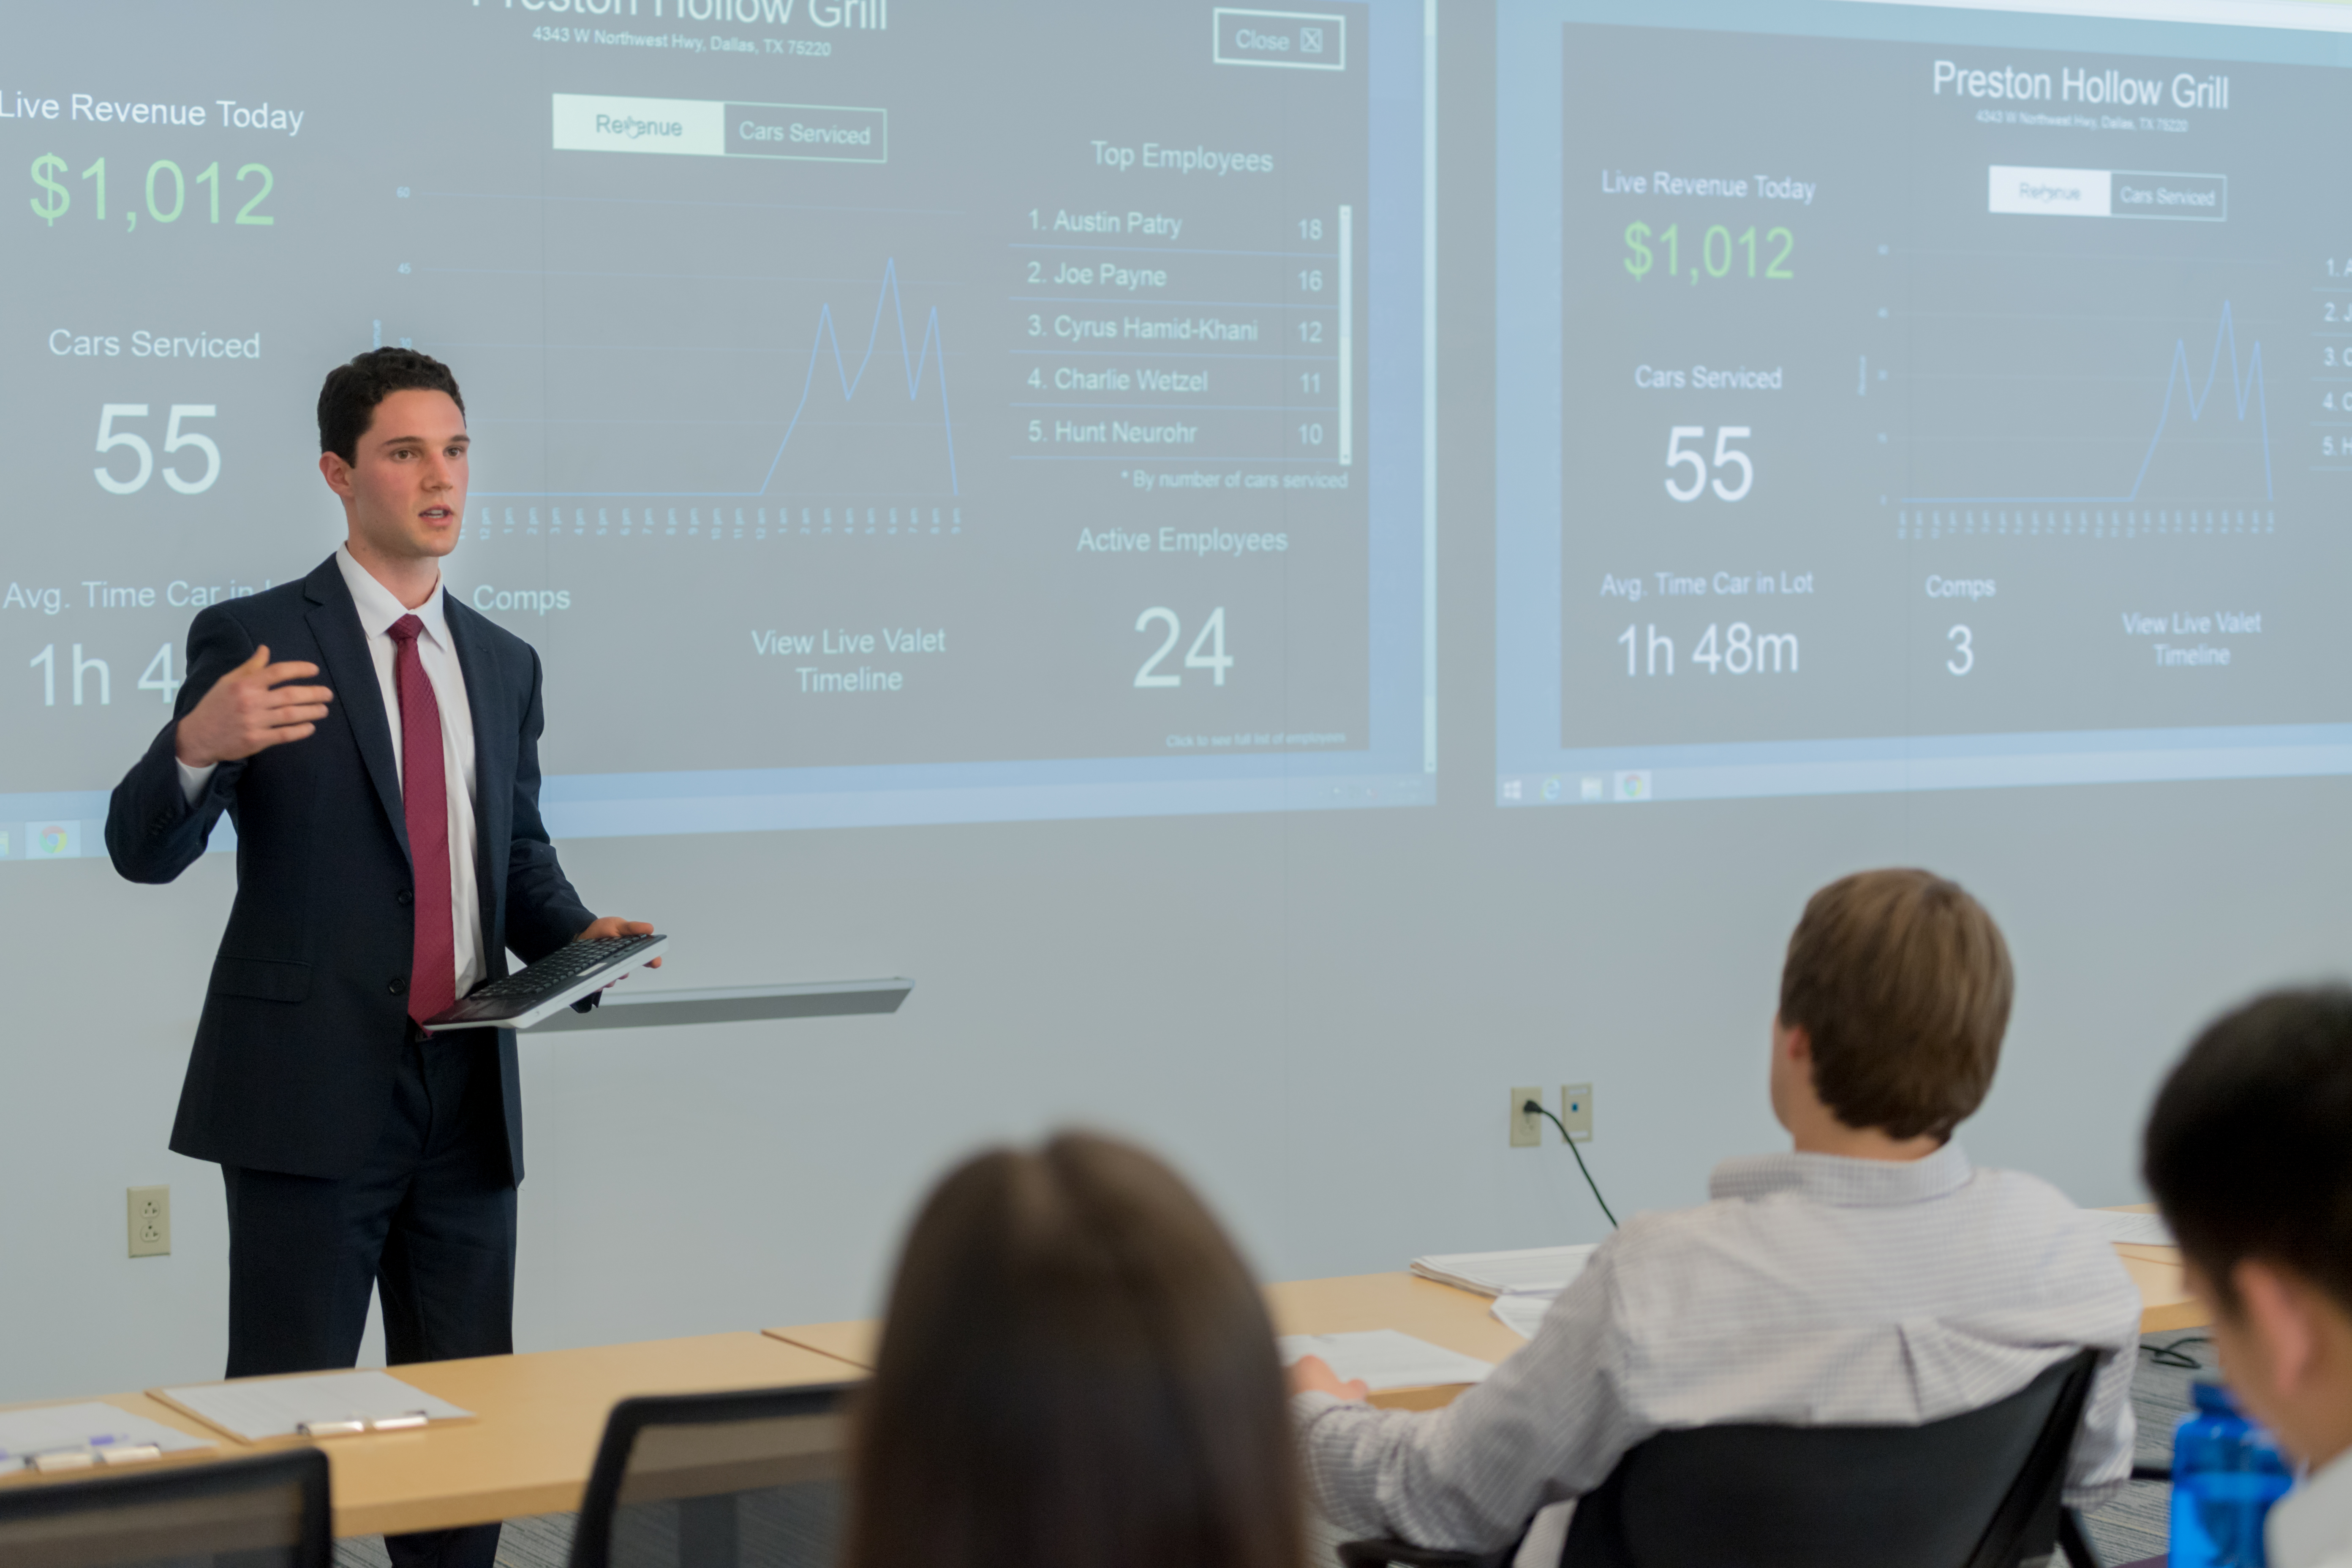 Austin Patry ’17 pitched a business plan for a valet service app to student investors who made funding decisions as part of the Entrepreneurial Venture Deals class in the Neeley School of Business. Photo by Leo Wesson